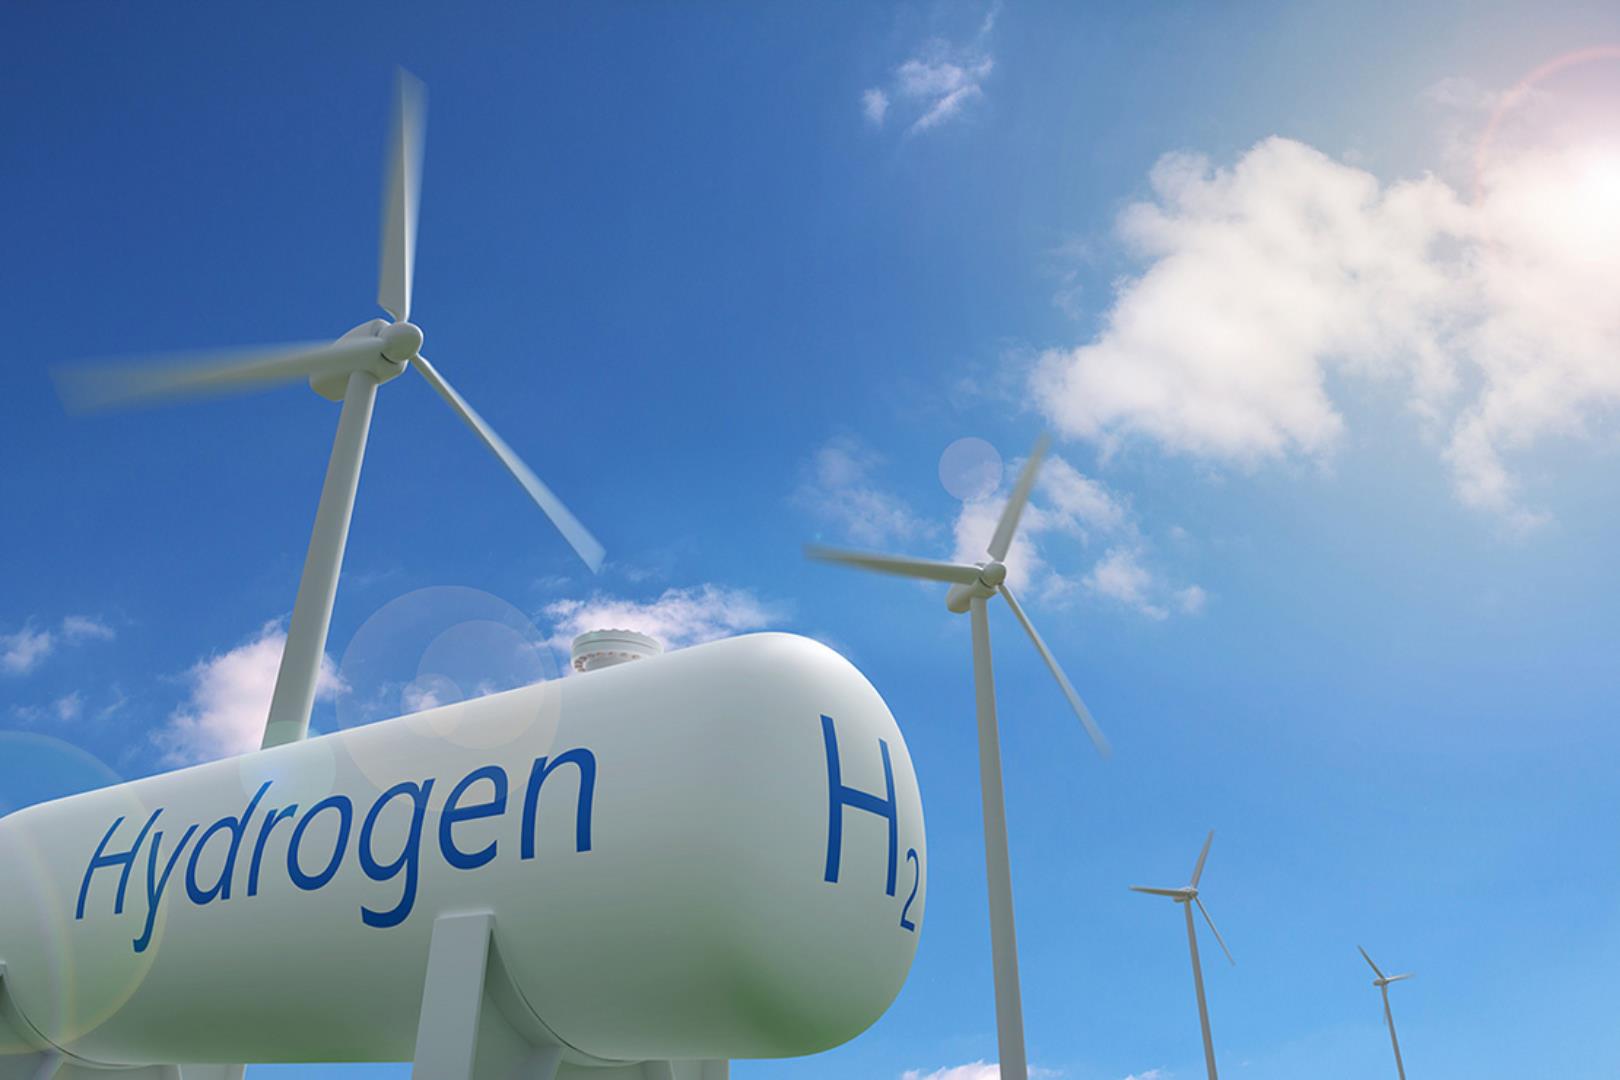 Green hydrogen is the future.  This compound will make it easier to manufacture